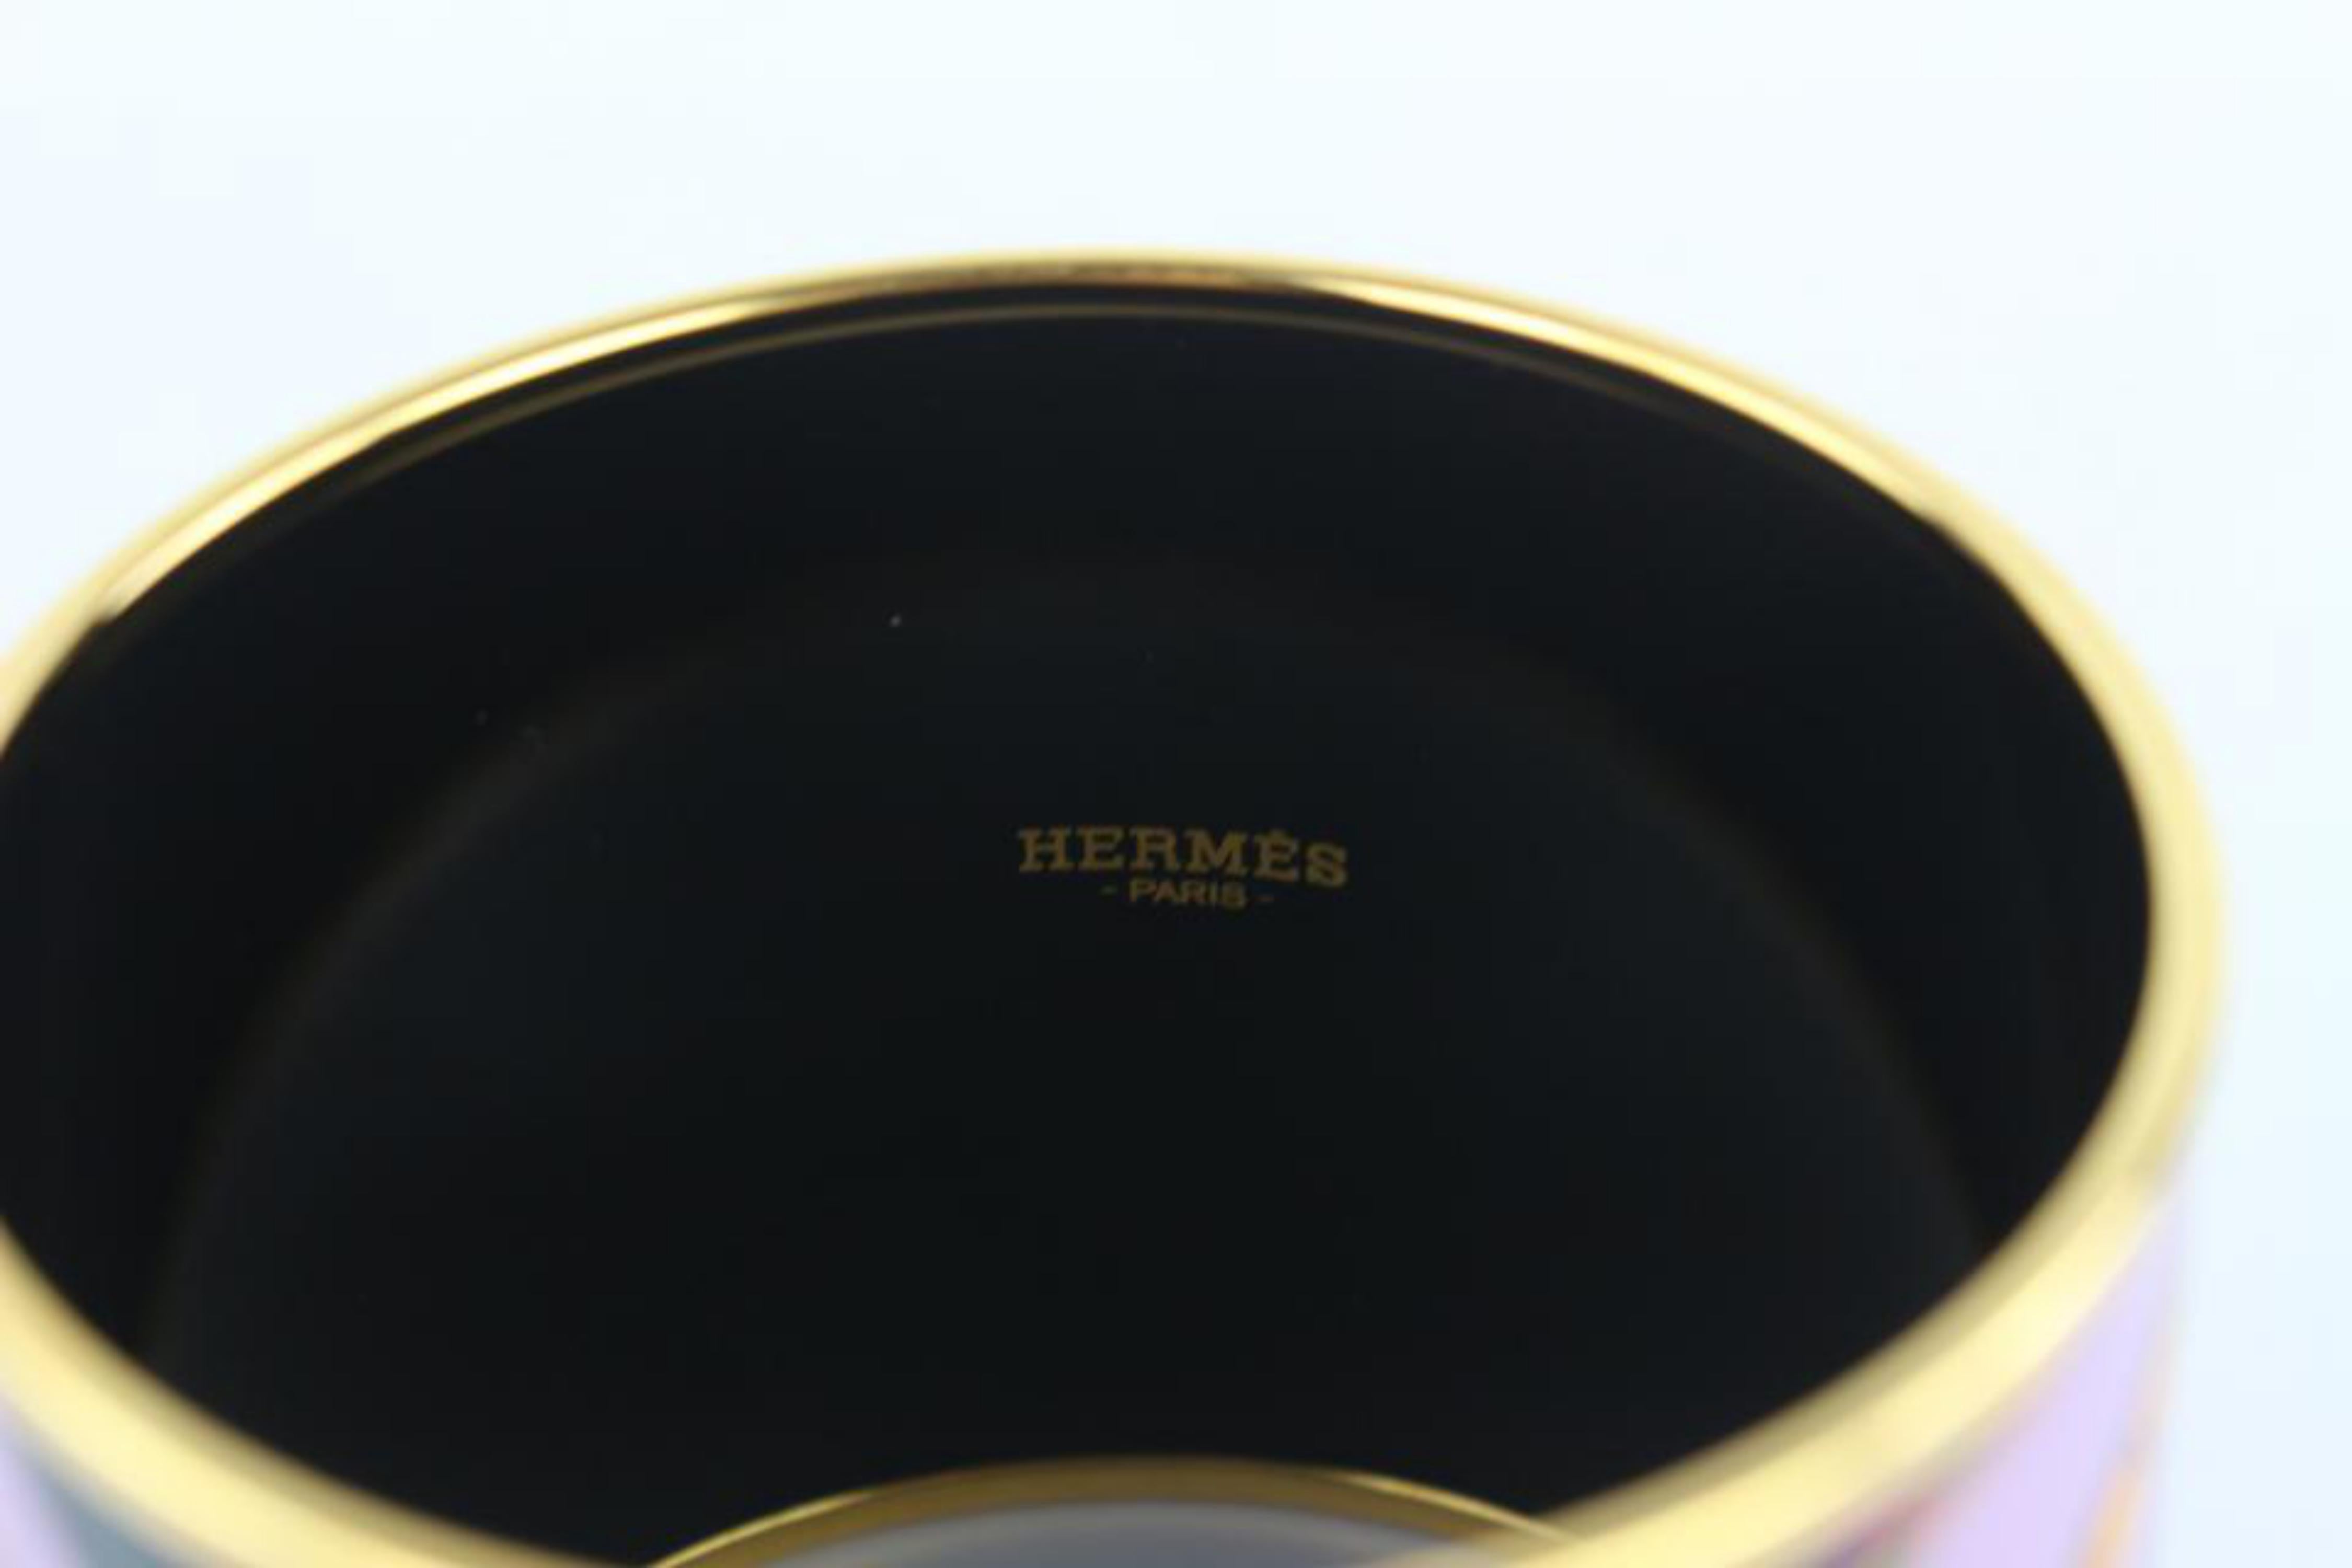 Hermès Multicolor Extra Ultra Mega Wide Bangle 48hz1009 Bracelet In New Condition For Sale In Forest Hills, NY